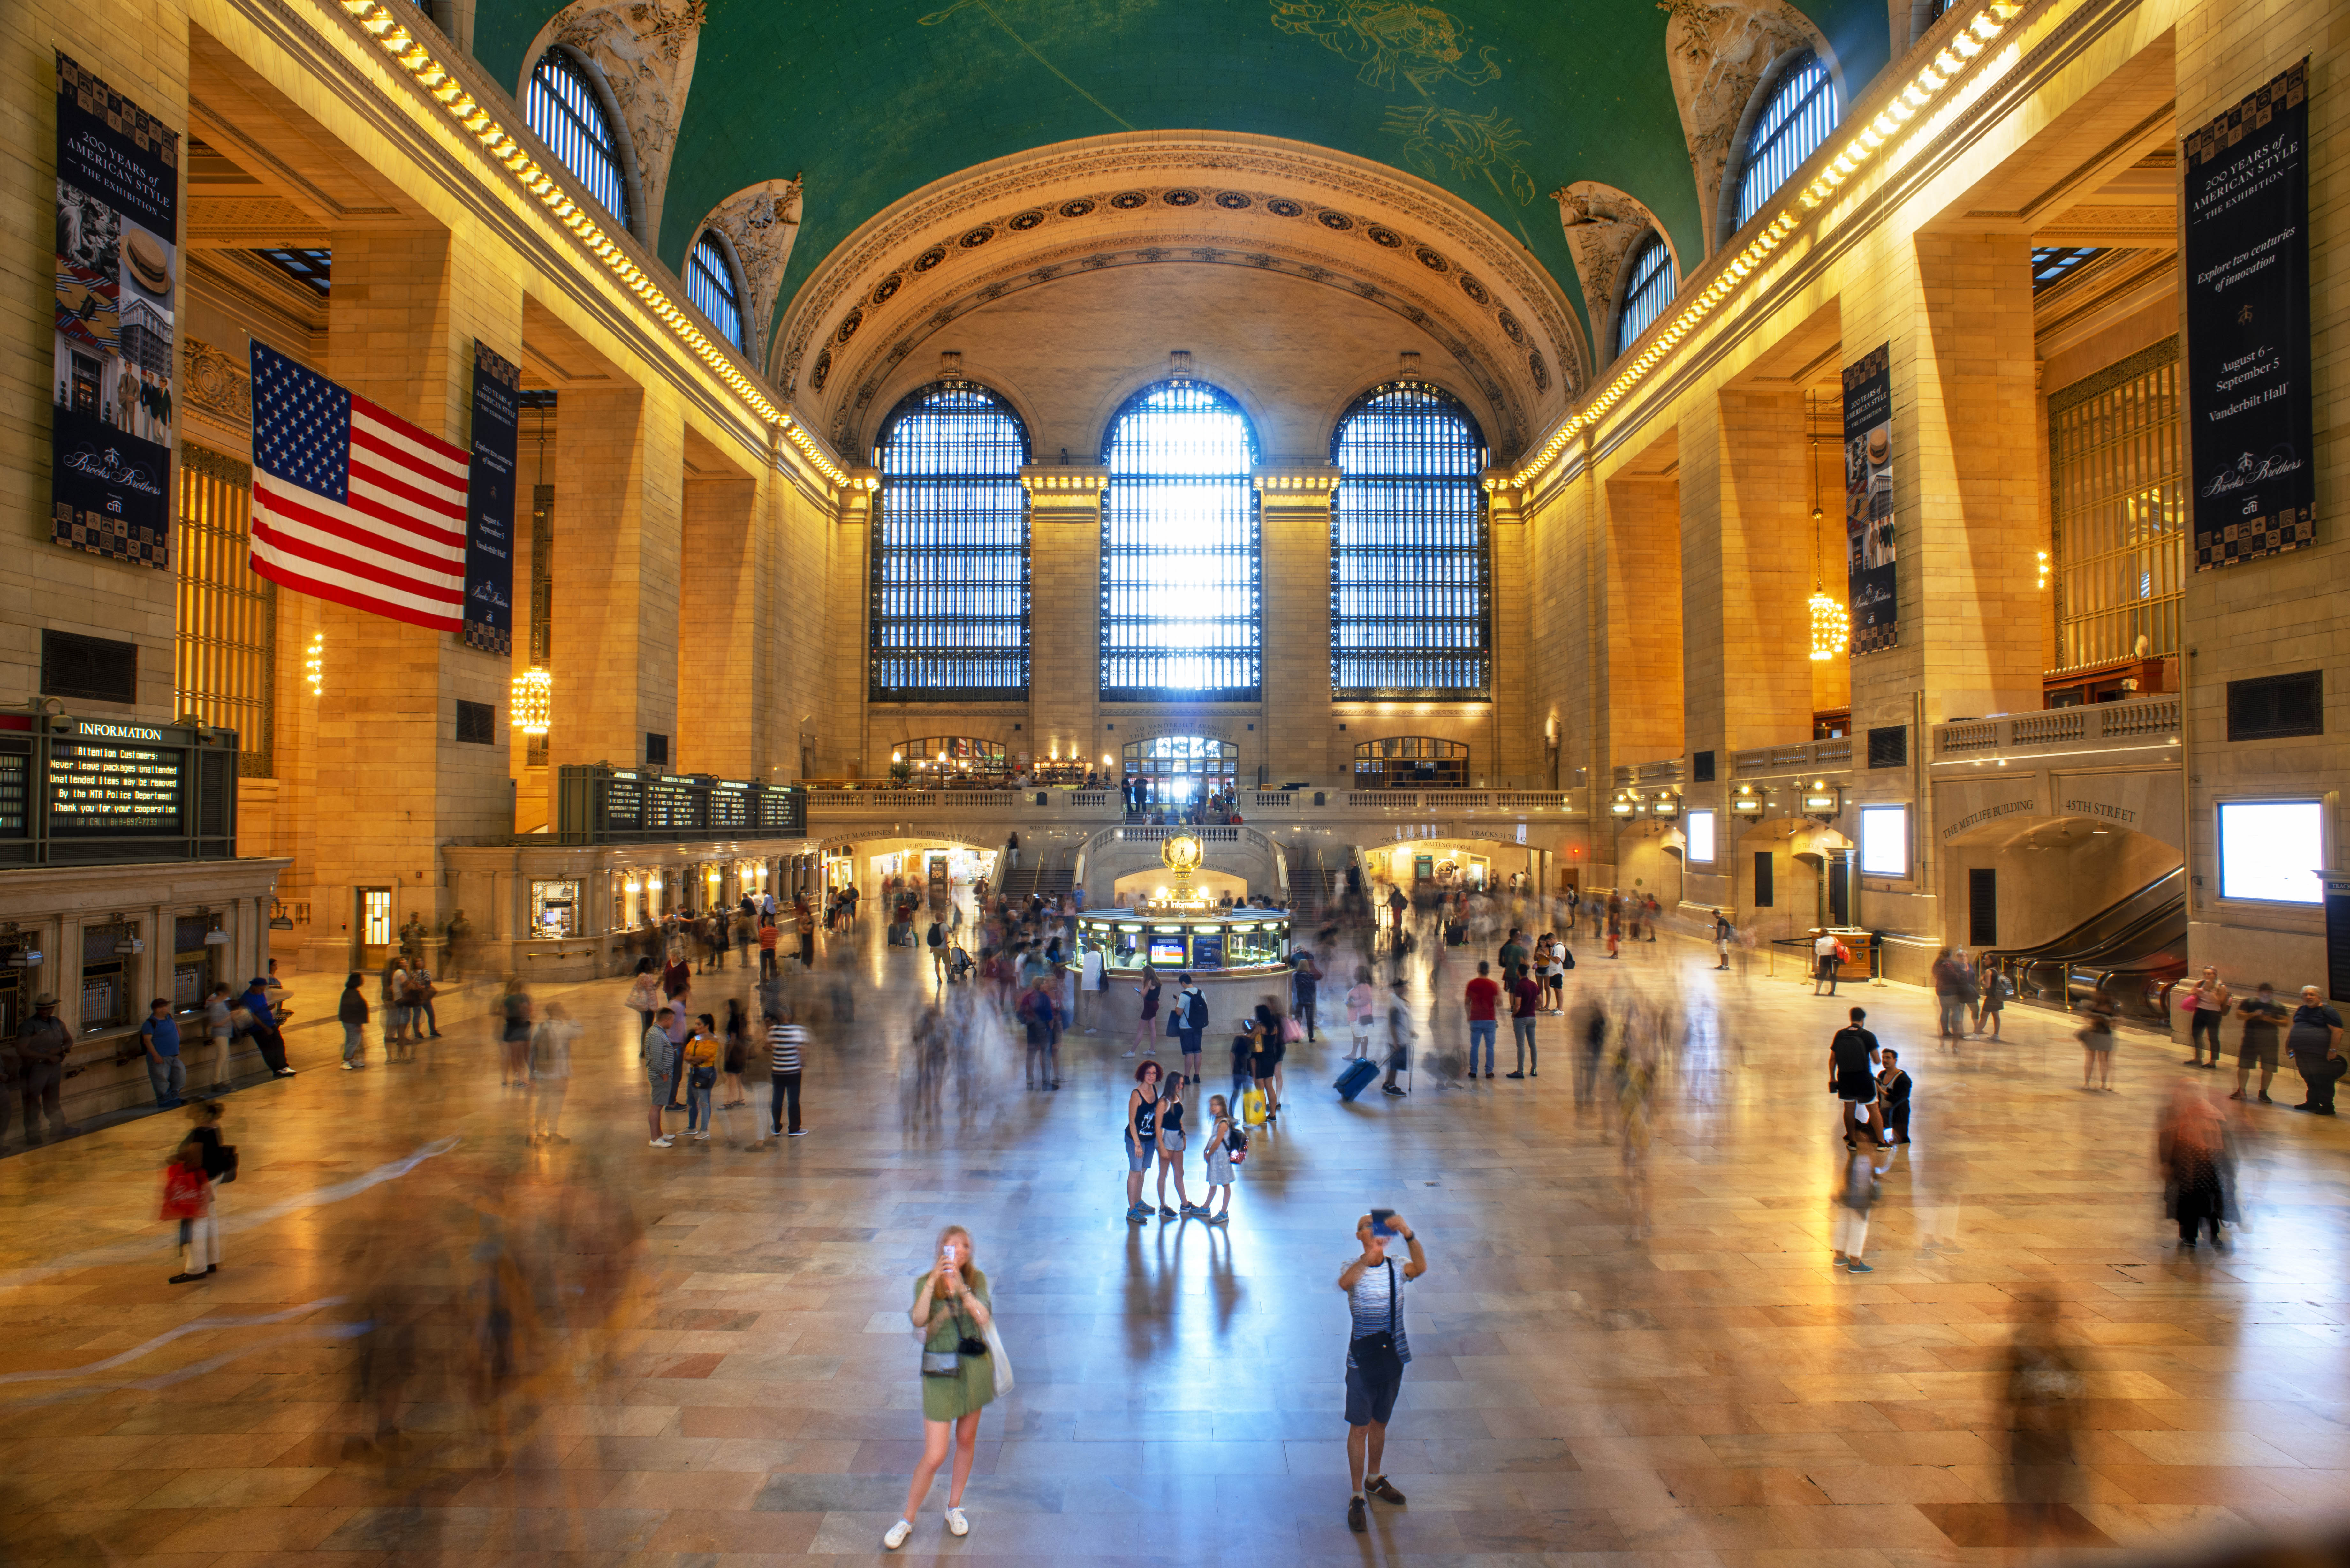 A photo of the breathtaking interior of Grand Central